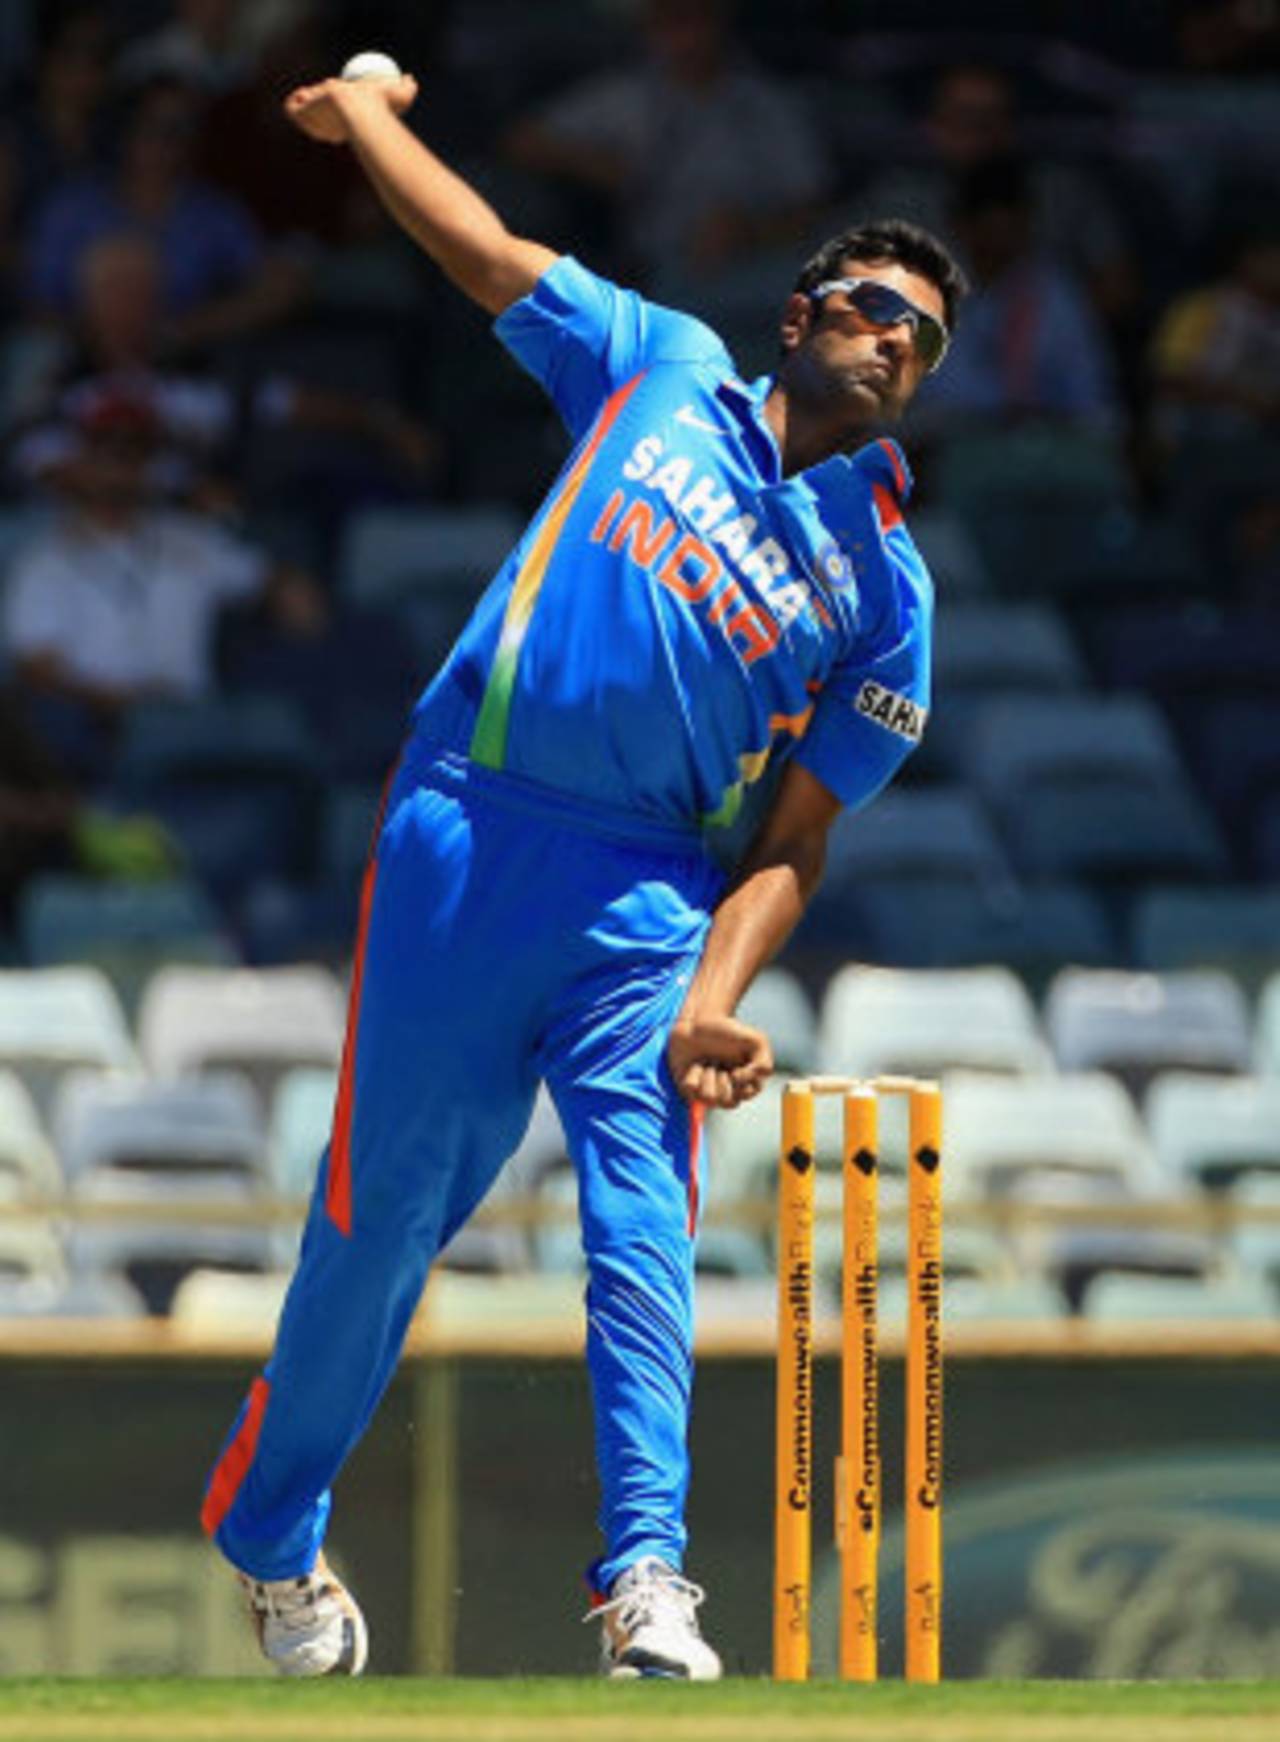 R Ashwin bowled with more control than in the first match, India v Sri Lanka, CB Series, 2nd ODI, Perth, February 8, 2012